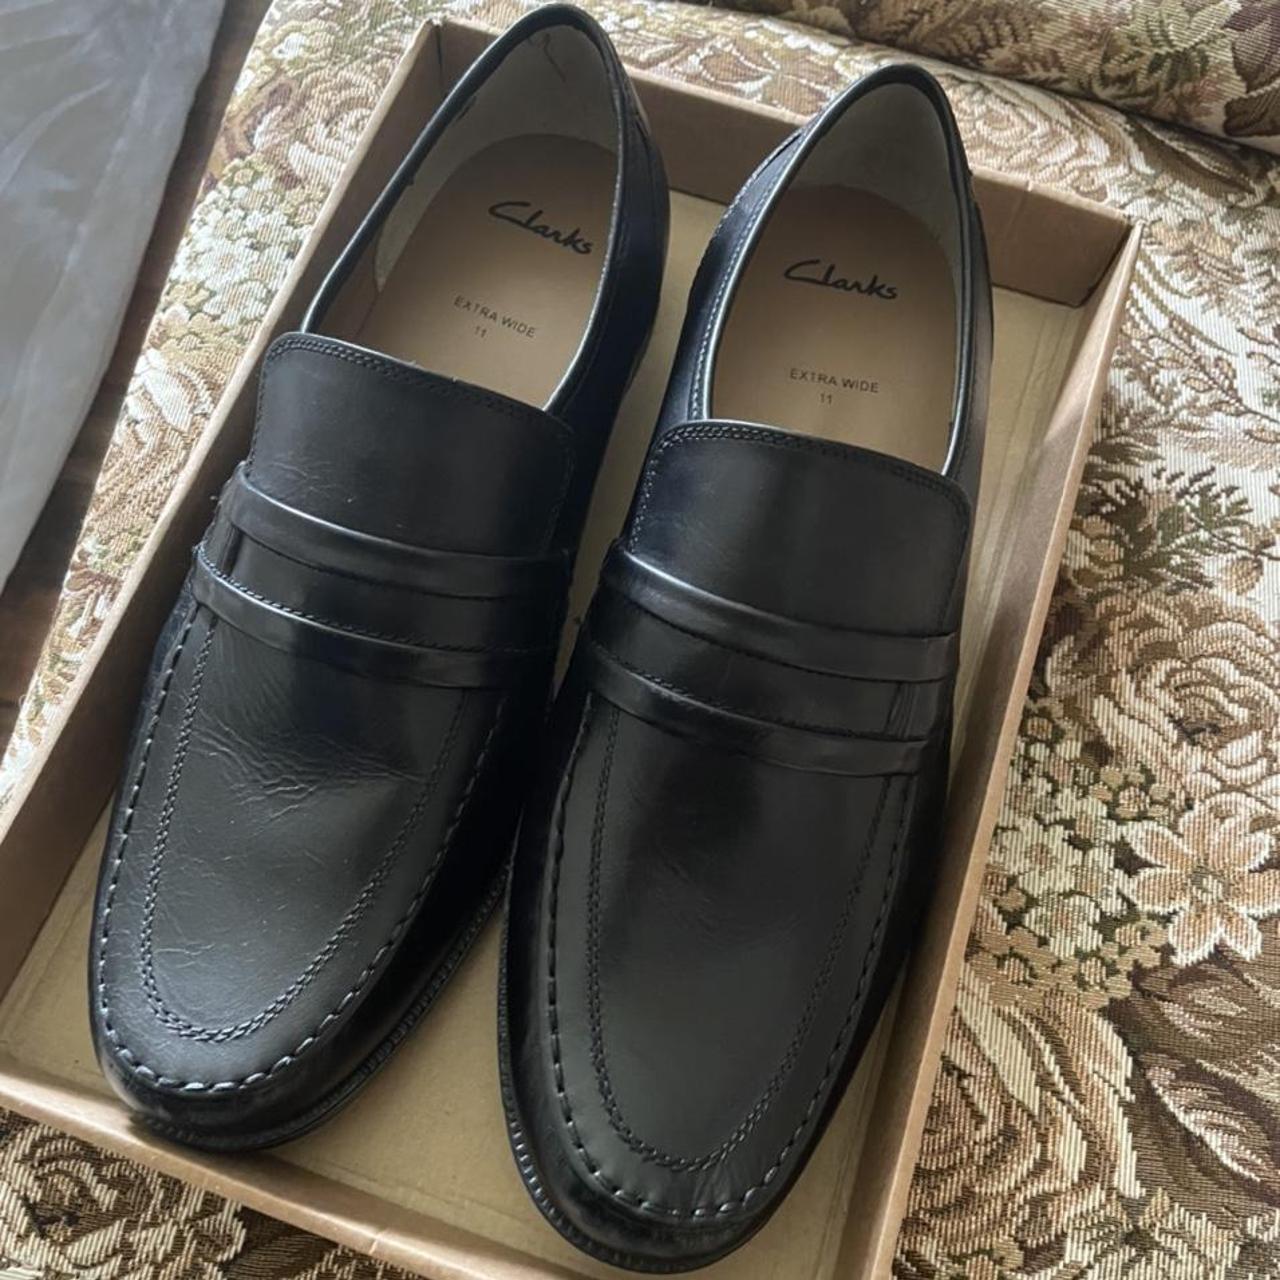 Brand new Clarks shoes, perfect condition, don’t... - Depop